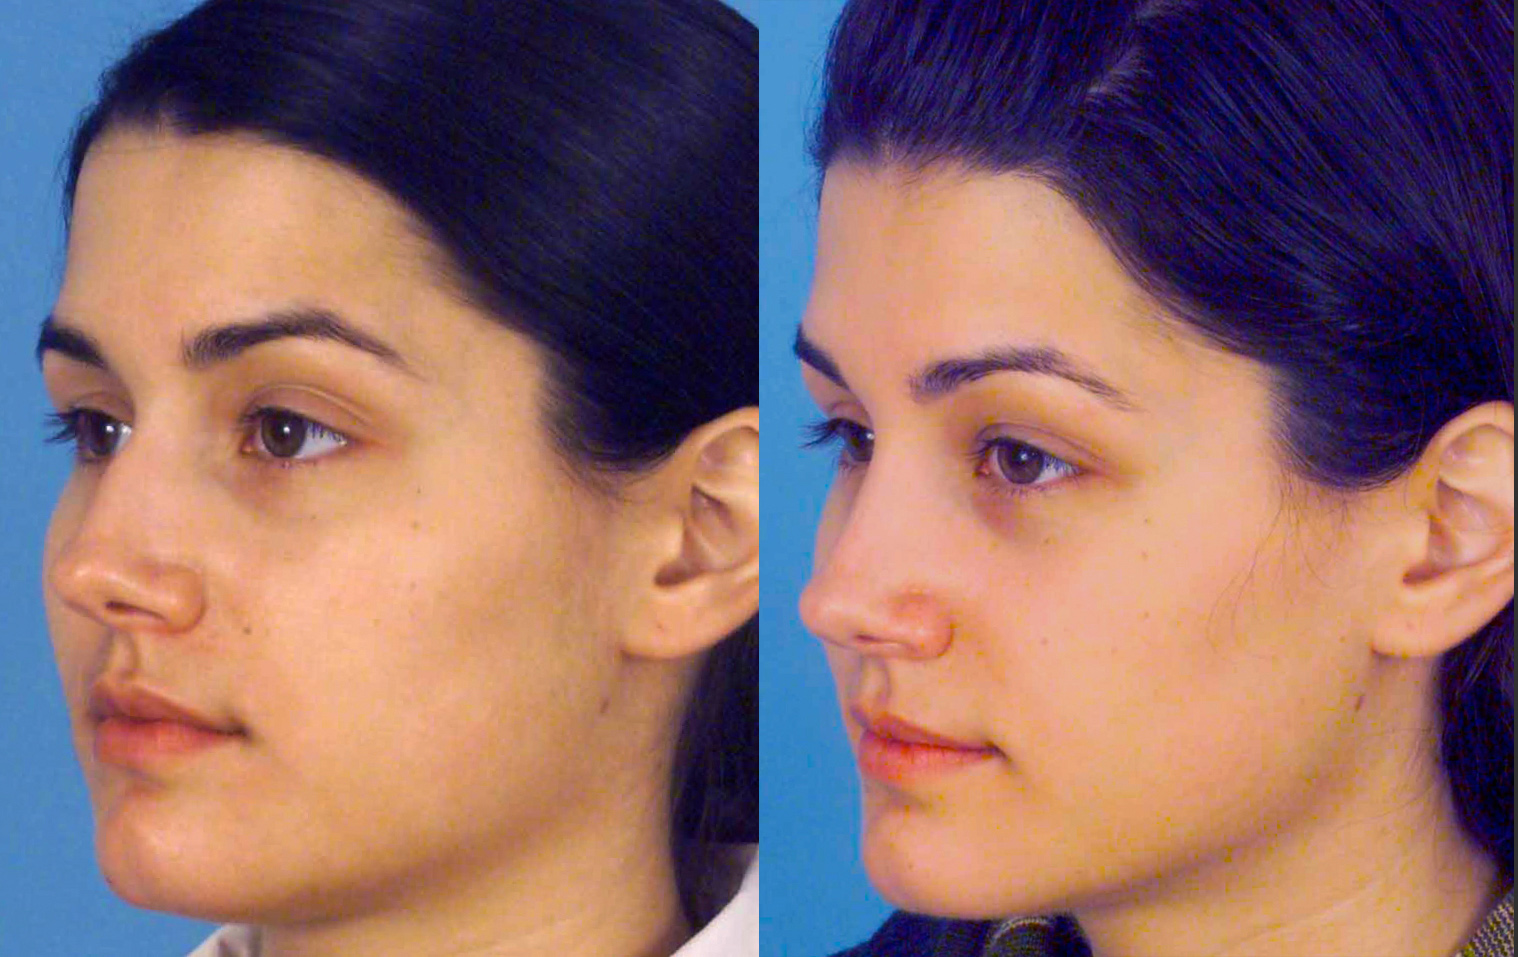 Before and After Rhinoplasty photos